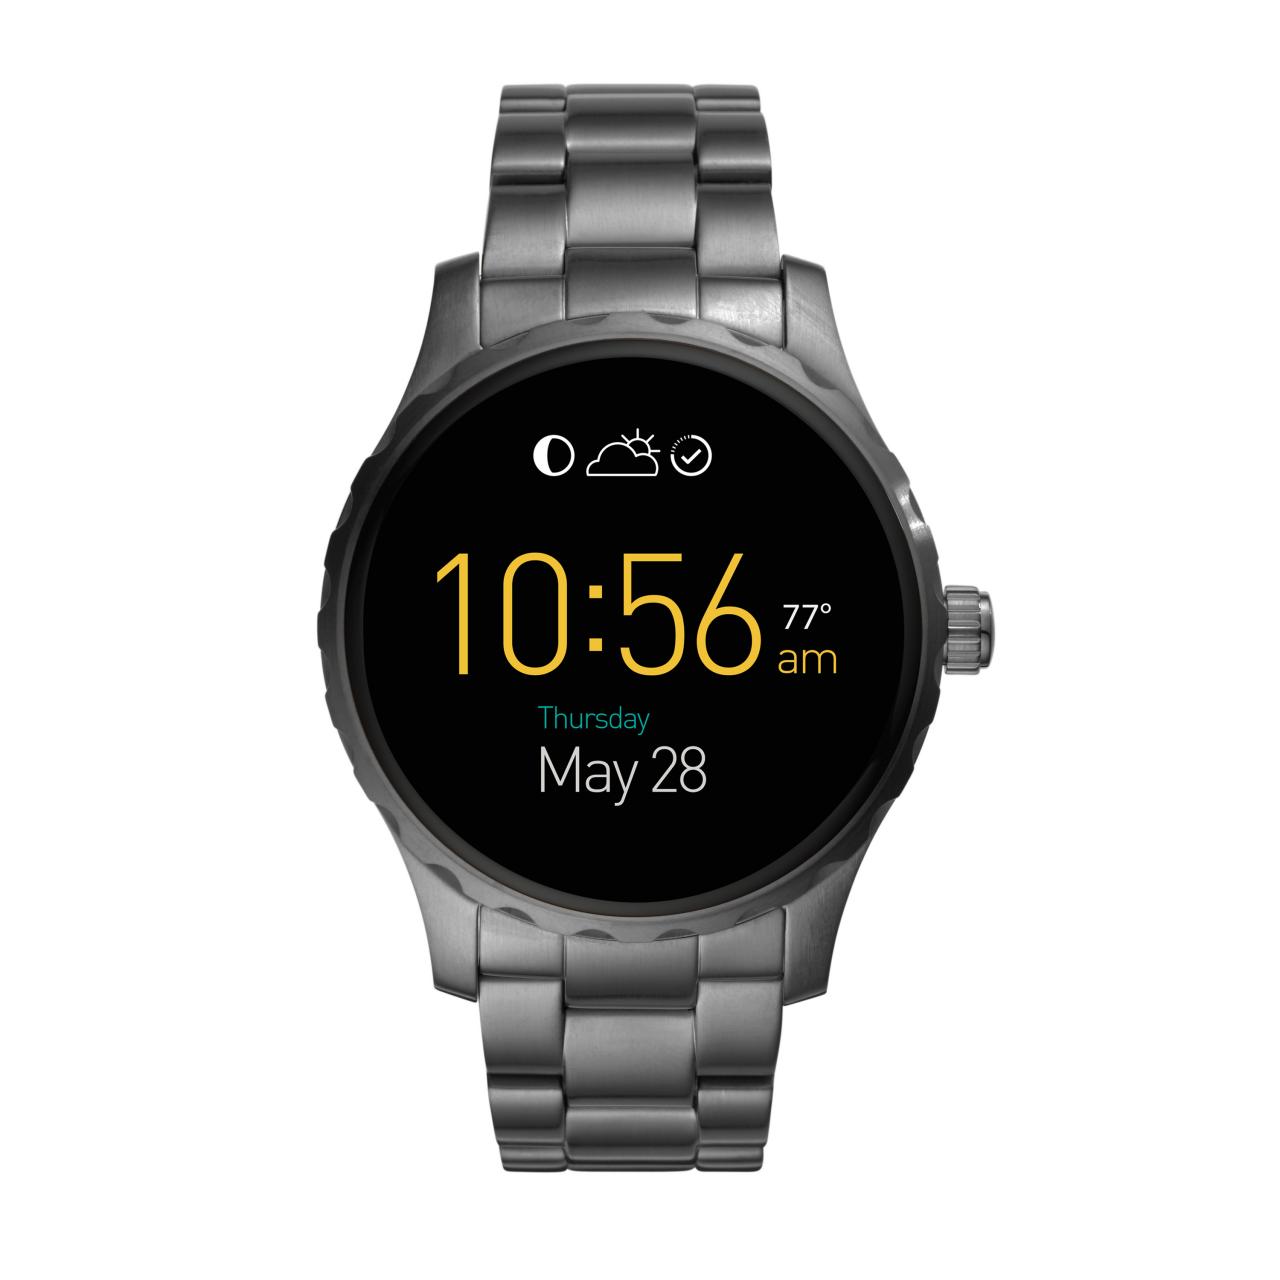 Fossil Q Marshal, Wander pre-order and launch dates set ...